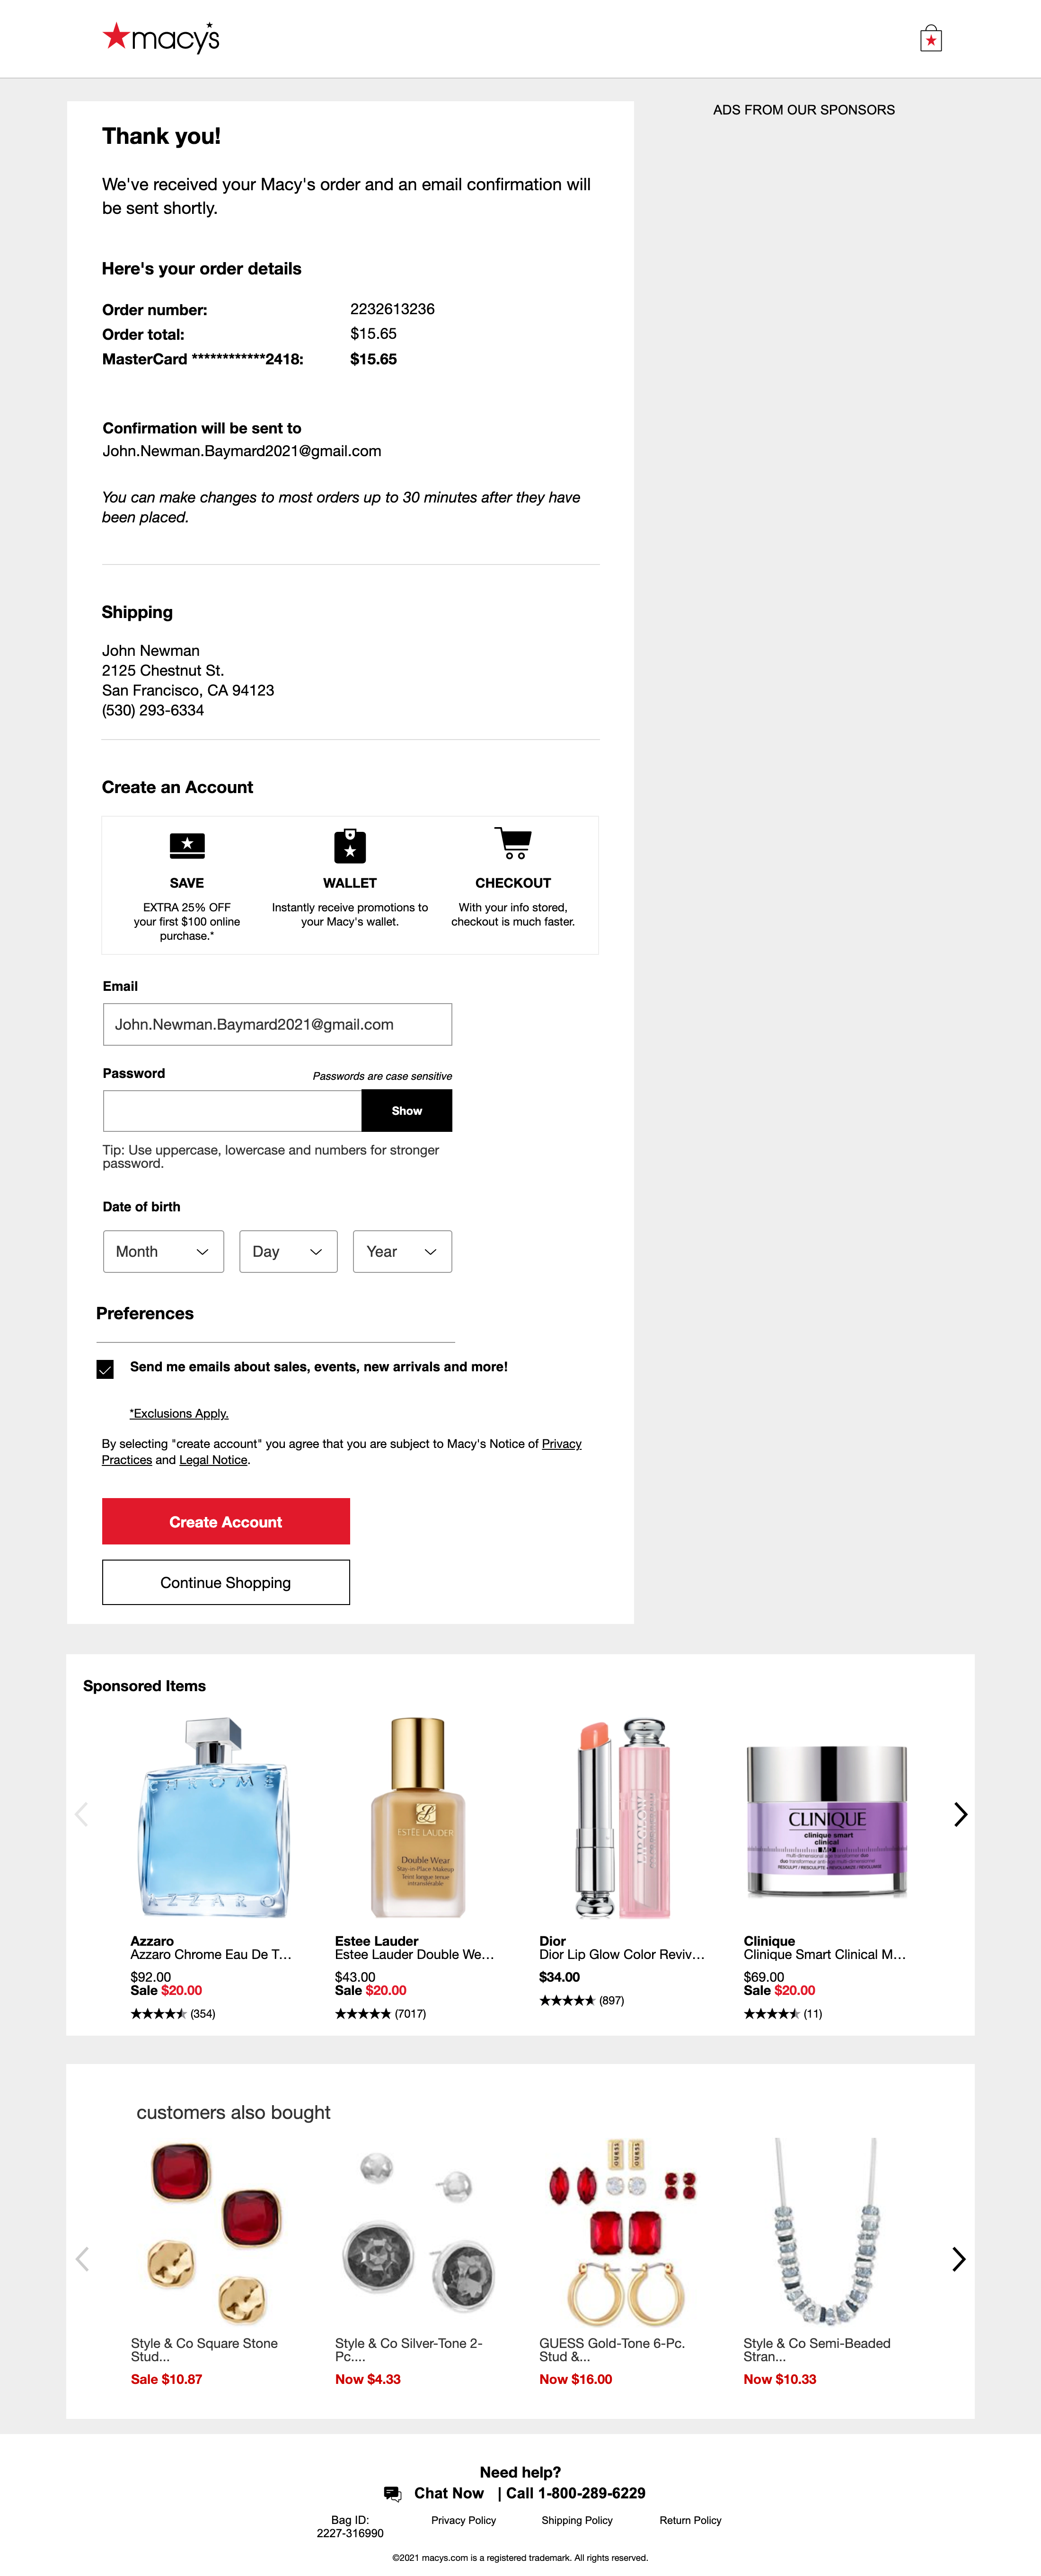 Macy's Receipt / Order Confirmation – 338 of 577 Receipt / Order  Confirmation Examples – Baymard Institute